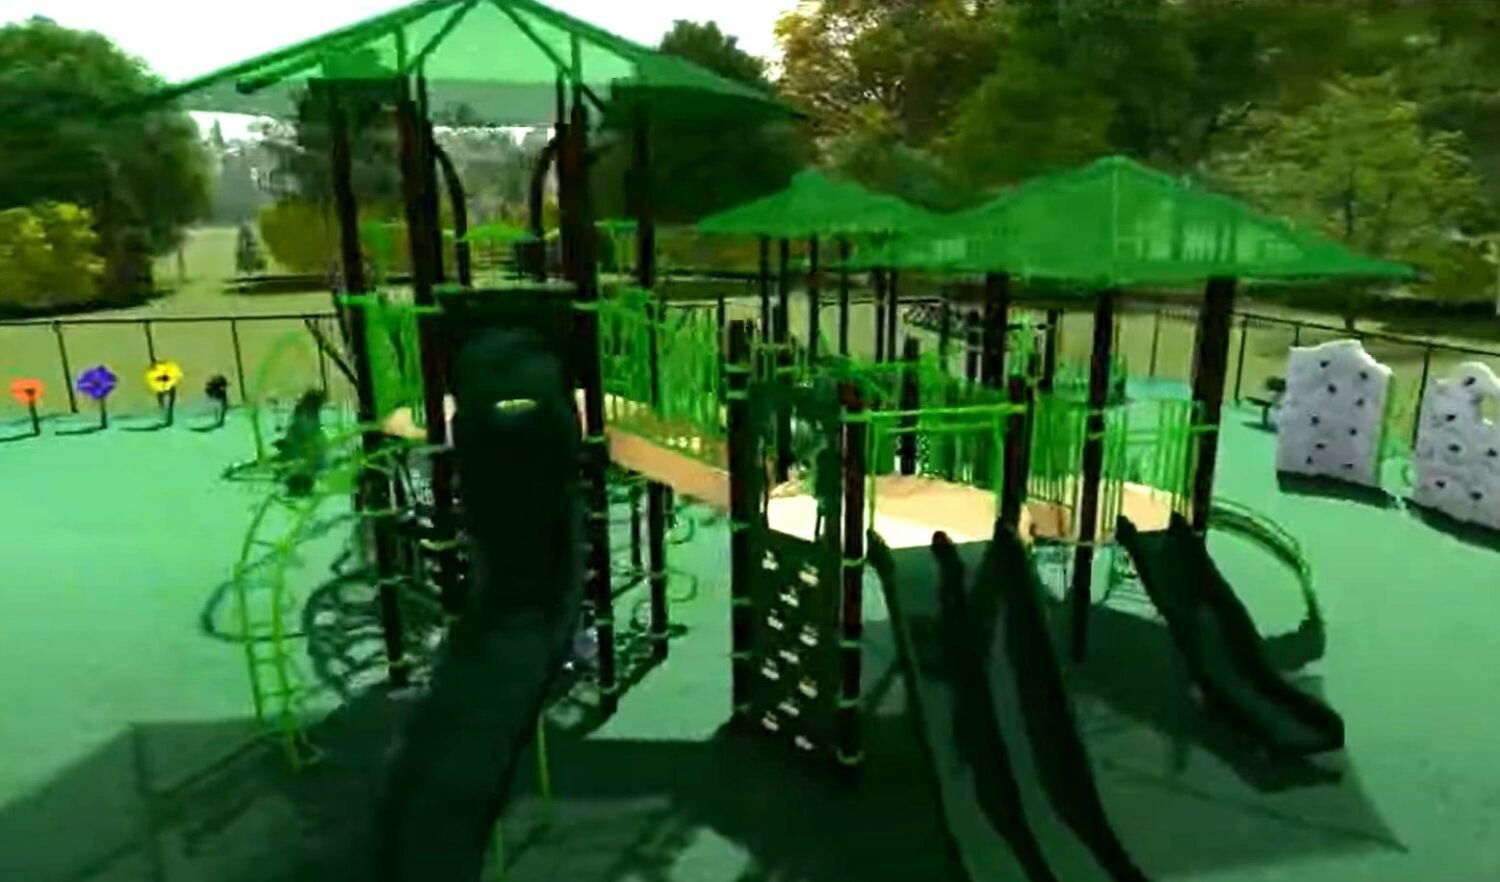 Virtual design models of the future Bradenton Kiwanis Playground at Tom Bennet Park were shown on an overhead during a presentation for county commissioners on Tuesday.